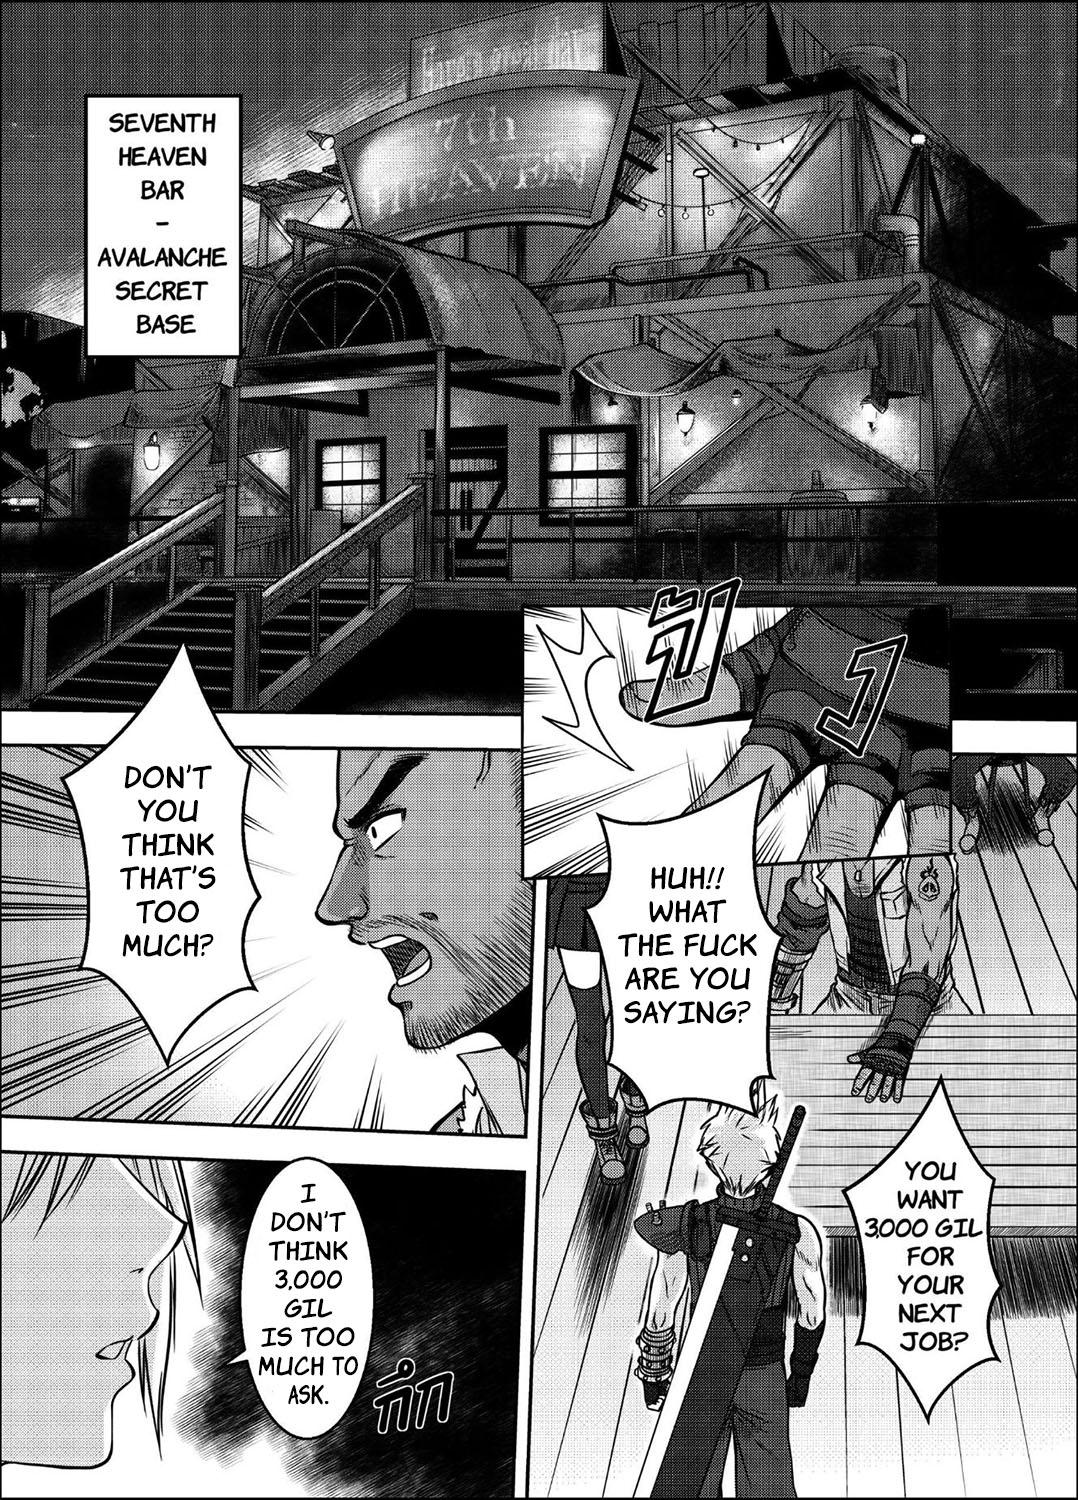 Strap On [XTER] OUR [X] PROMISE (Final Fantasy VII) [English] [XNumbers] - Final fantasy vii Bukkake - Page 5